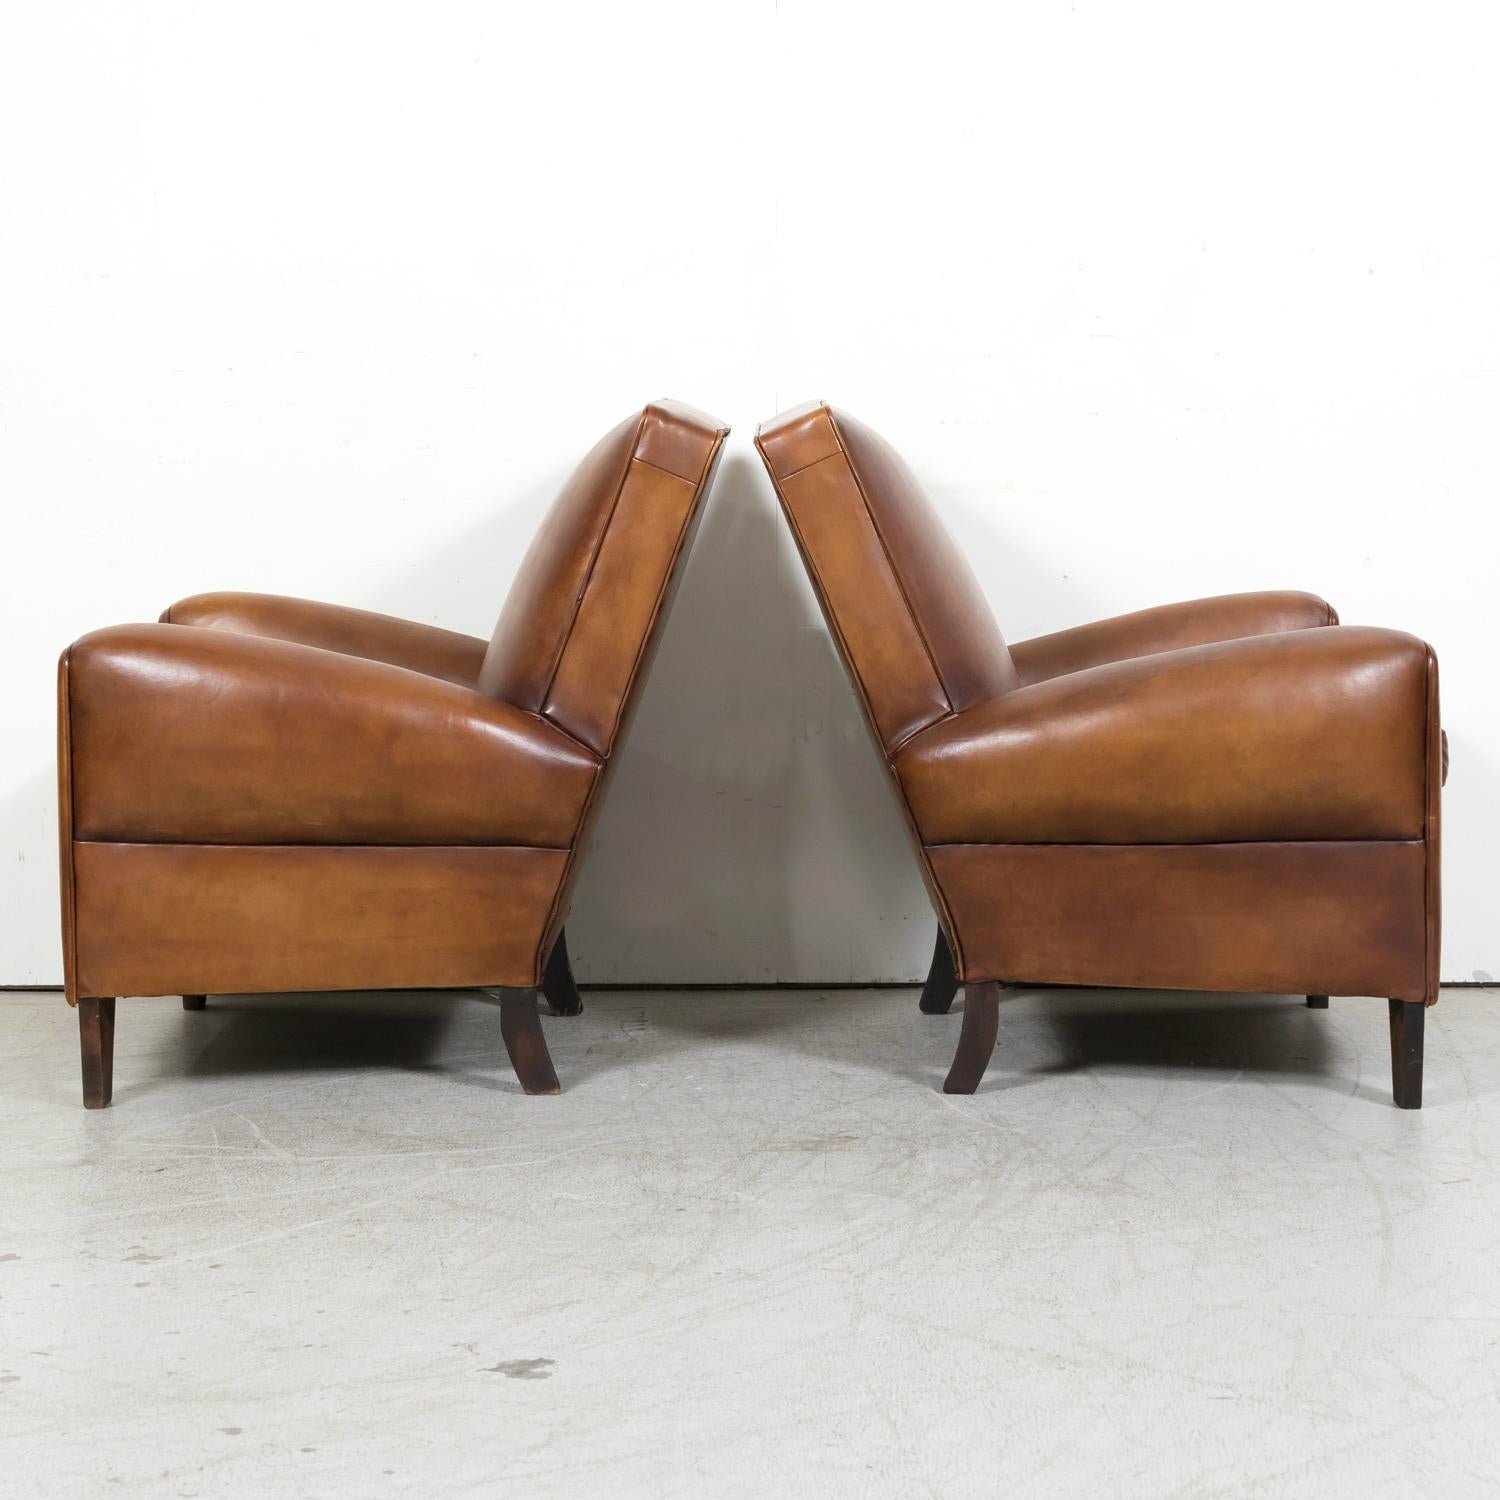 Hand-Crafted 1930s Pair of French Art Deco Period Cognac Leather Club Chairs